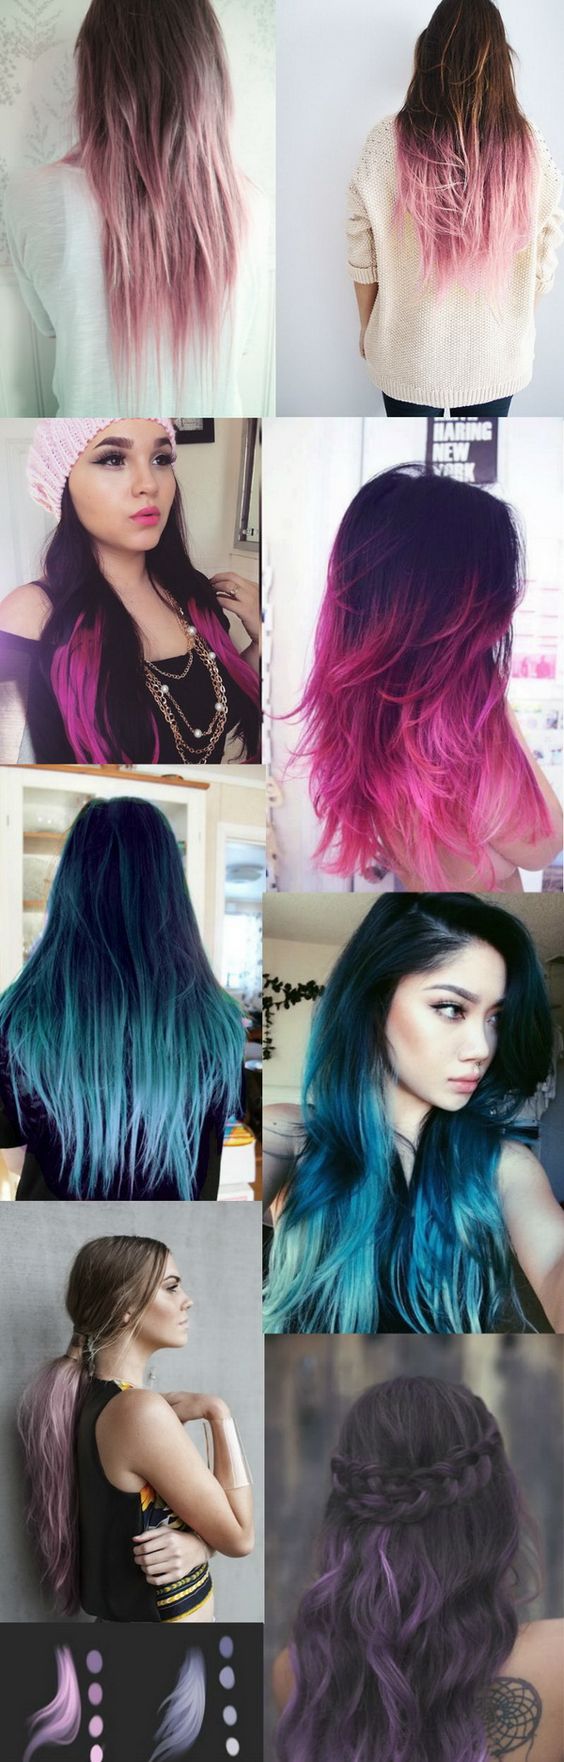 Pastel Ombre Hairstyles